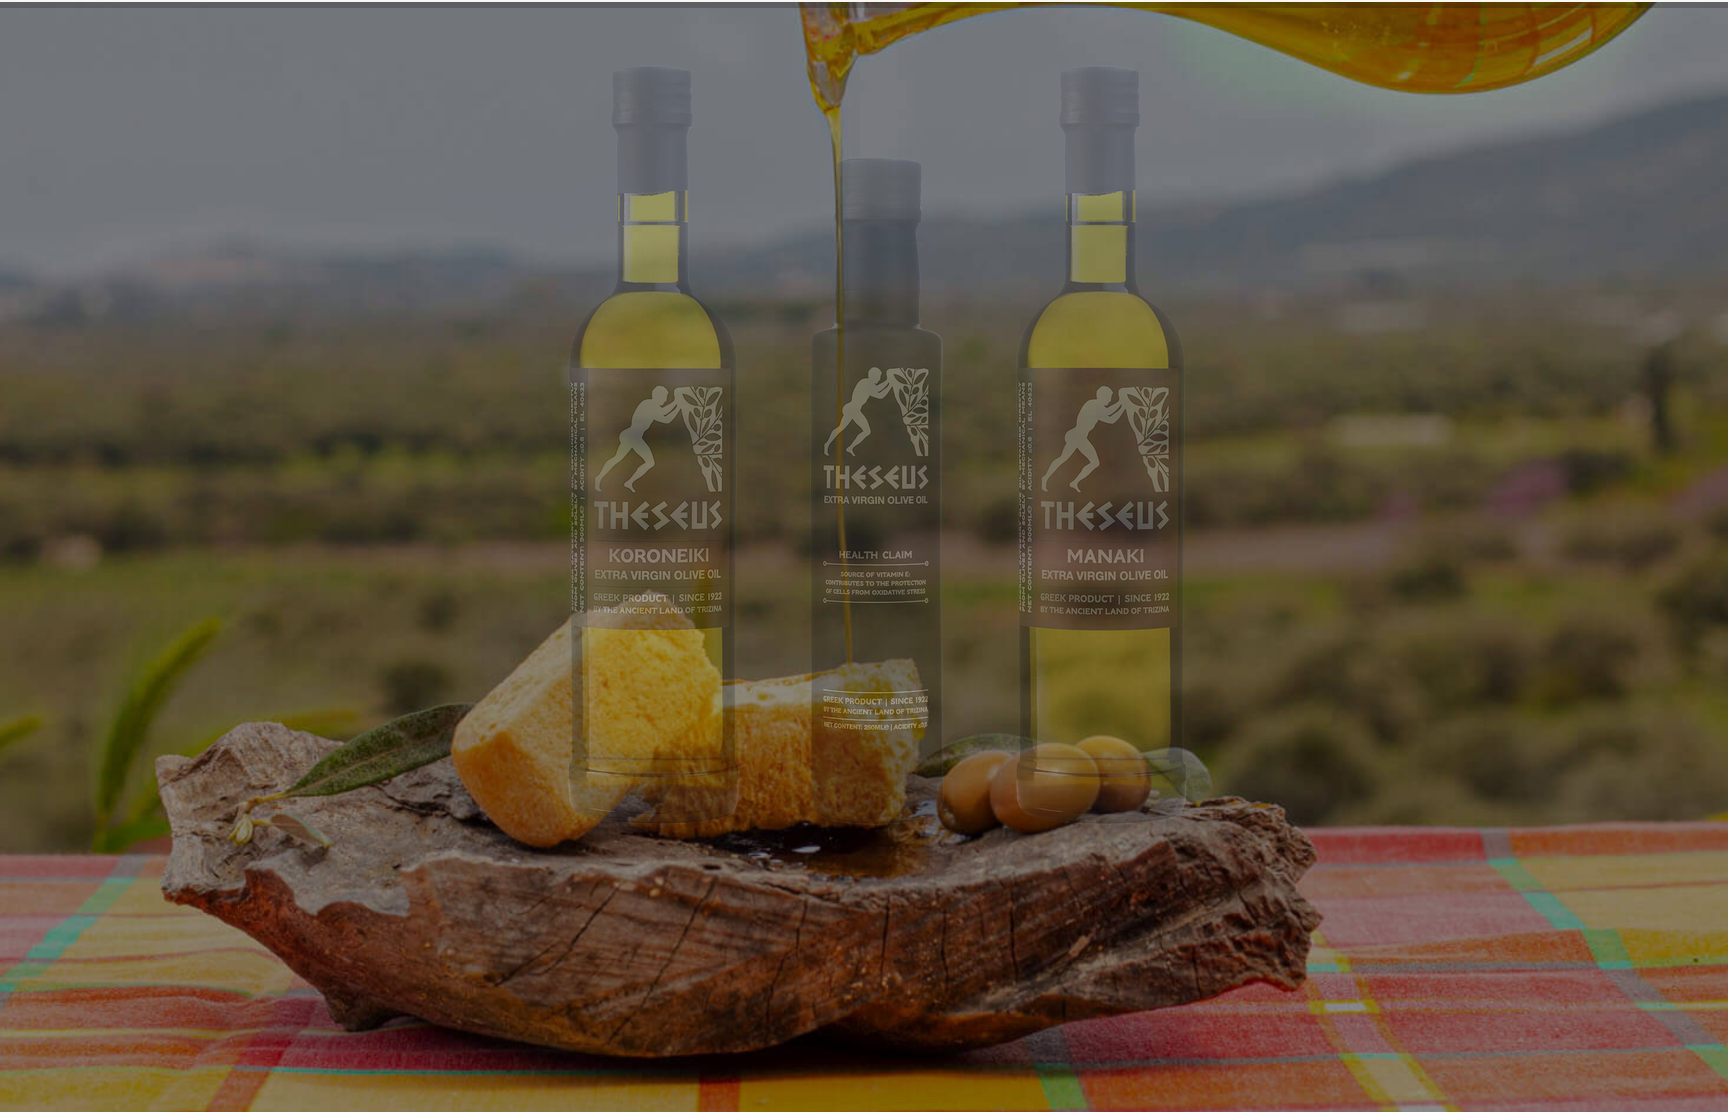 Screenshot of animation from the Theseus Extra Virgin Olive Oil website (https://theseusevoo.gr/)